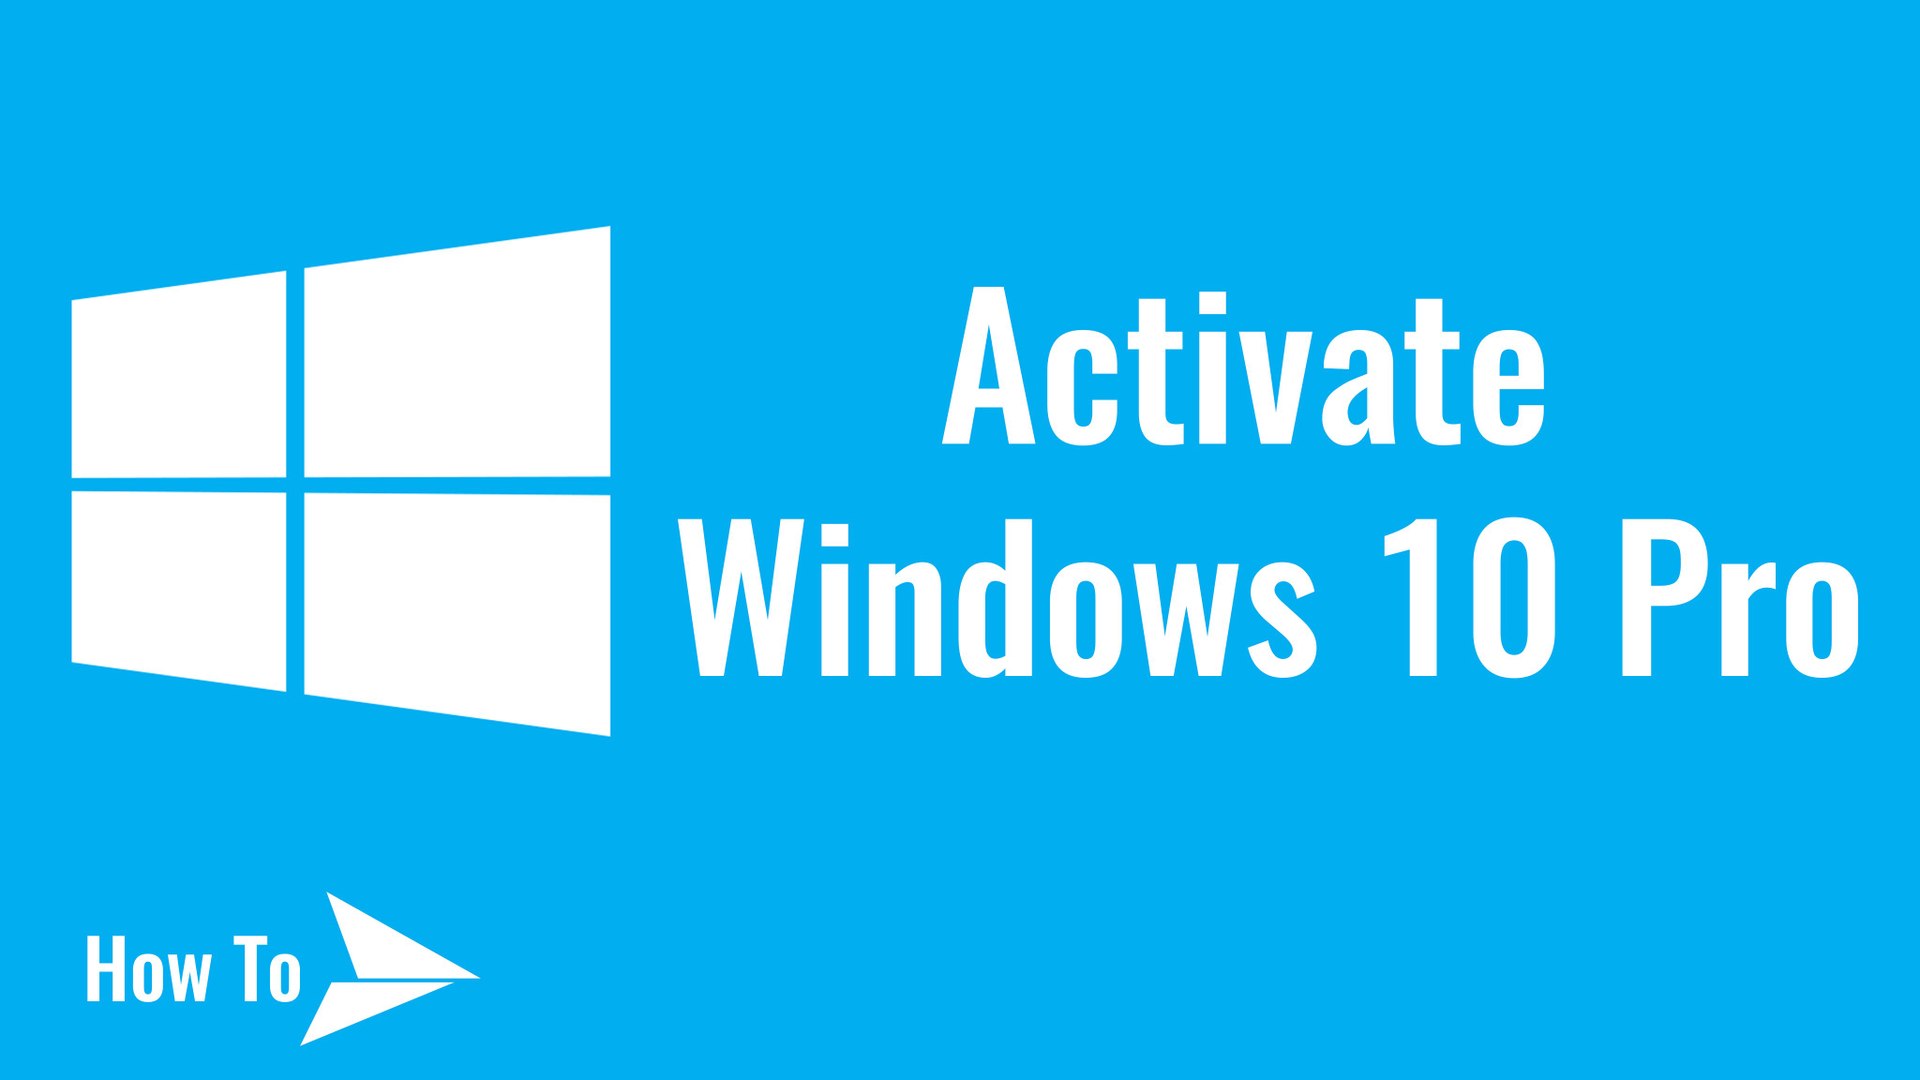 product key to activate windows 10 pro 2018